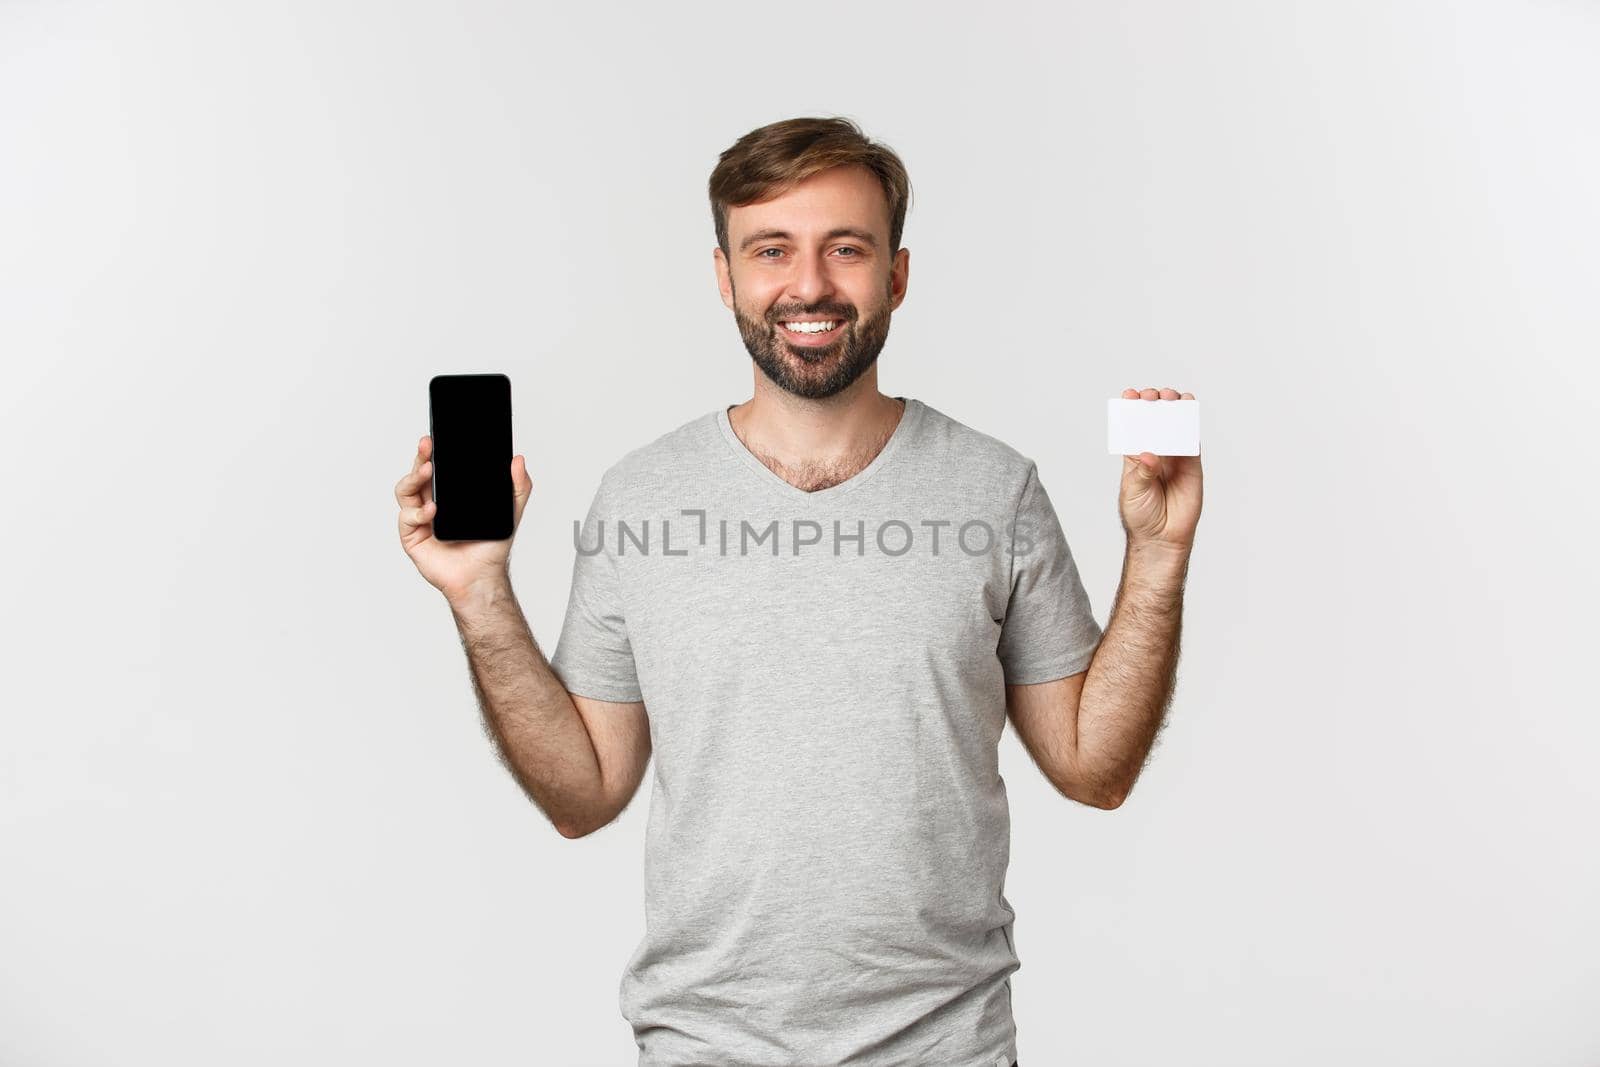 Handsome young man shopping online, holding credit card and mobile phone, showing smartphone screen, standing over white background.